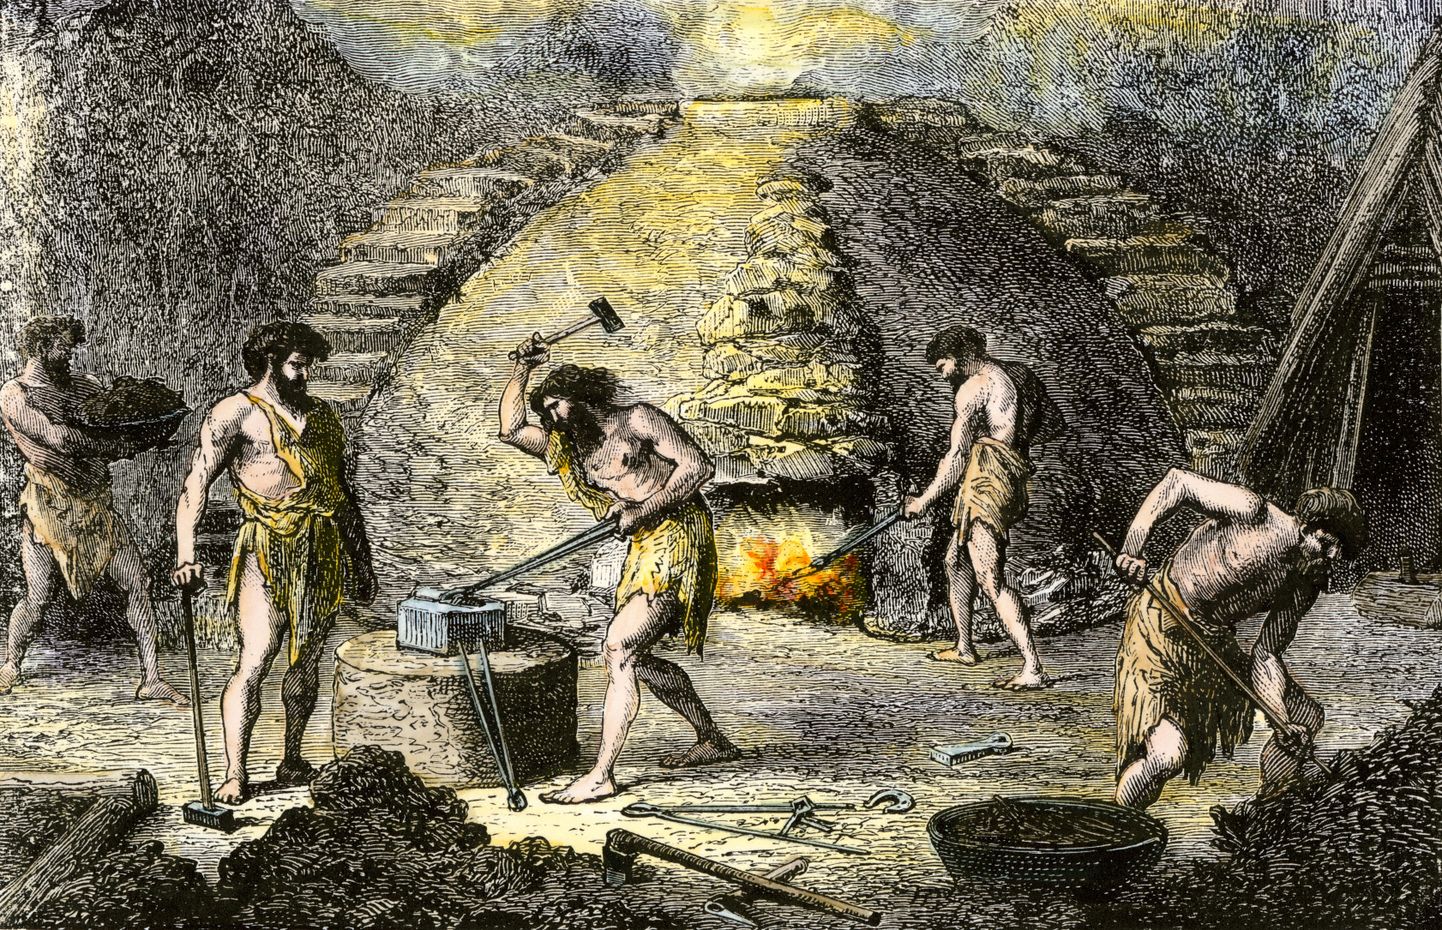 7US-N1-GANC2A-00309 (913825)


ORIGINAL:

Prehistoric people learning ironworking, the start of the Iron Age. Hand-colored woodcut of a 19th-century illustration